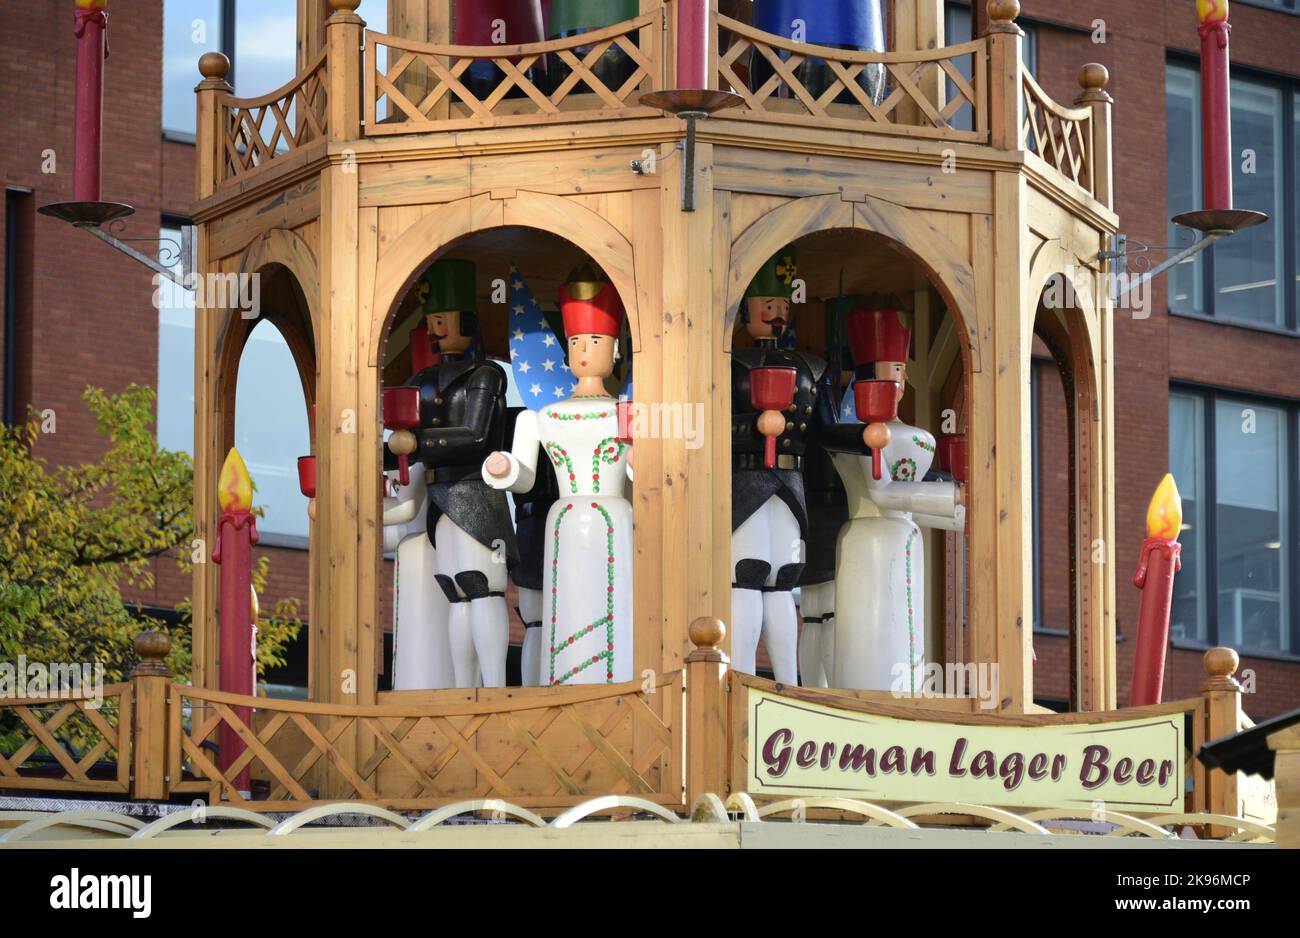 Wooden structure on top of a beer outlet as part of Manchester Christmas Market 2022, in Piccadilly Gardens, Manchester, England, UK, opening November 10, 2022. It advertises German lager beer. It features festive figures holding bells to ring in celebration of the Xmas season. Stock Photo